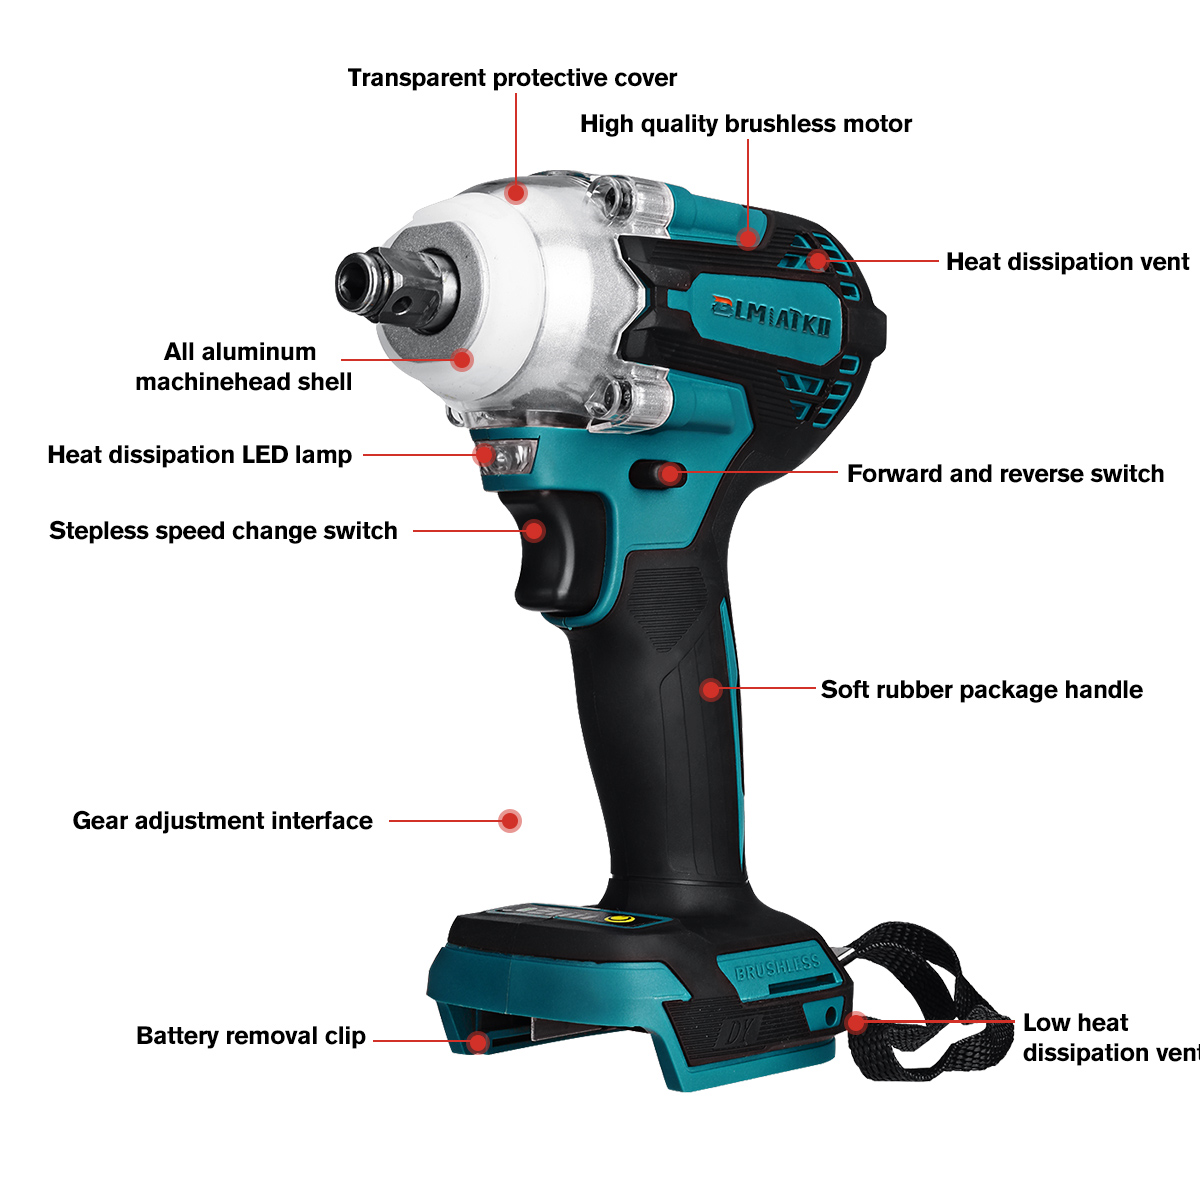 480Nm-Brushless-Impact-Wrench-Cordless-High-Torque-12-Socket-Electric-Wrench-Screwdriver-Power-Tool--1841579-12